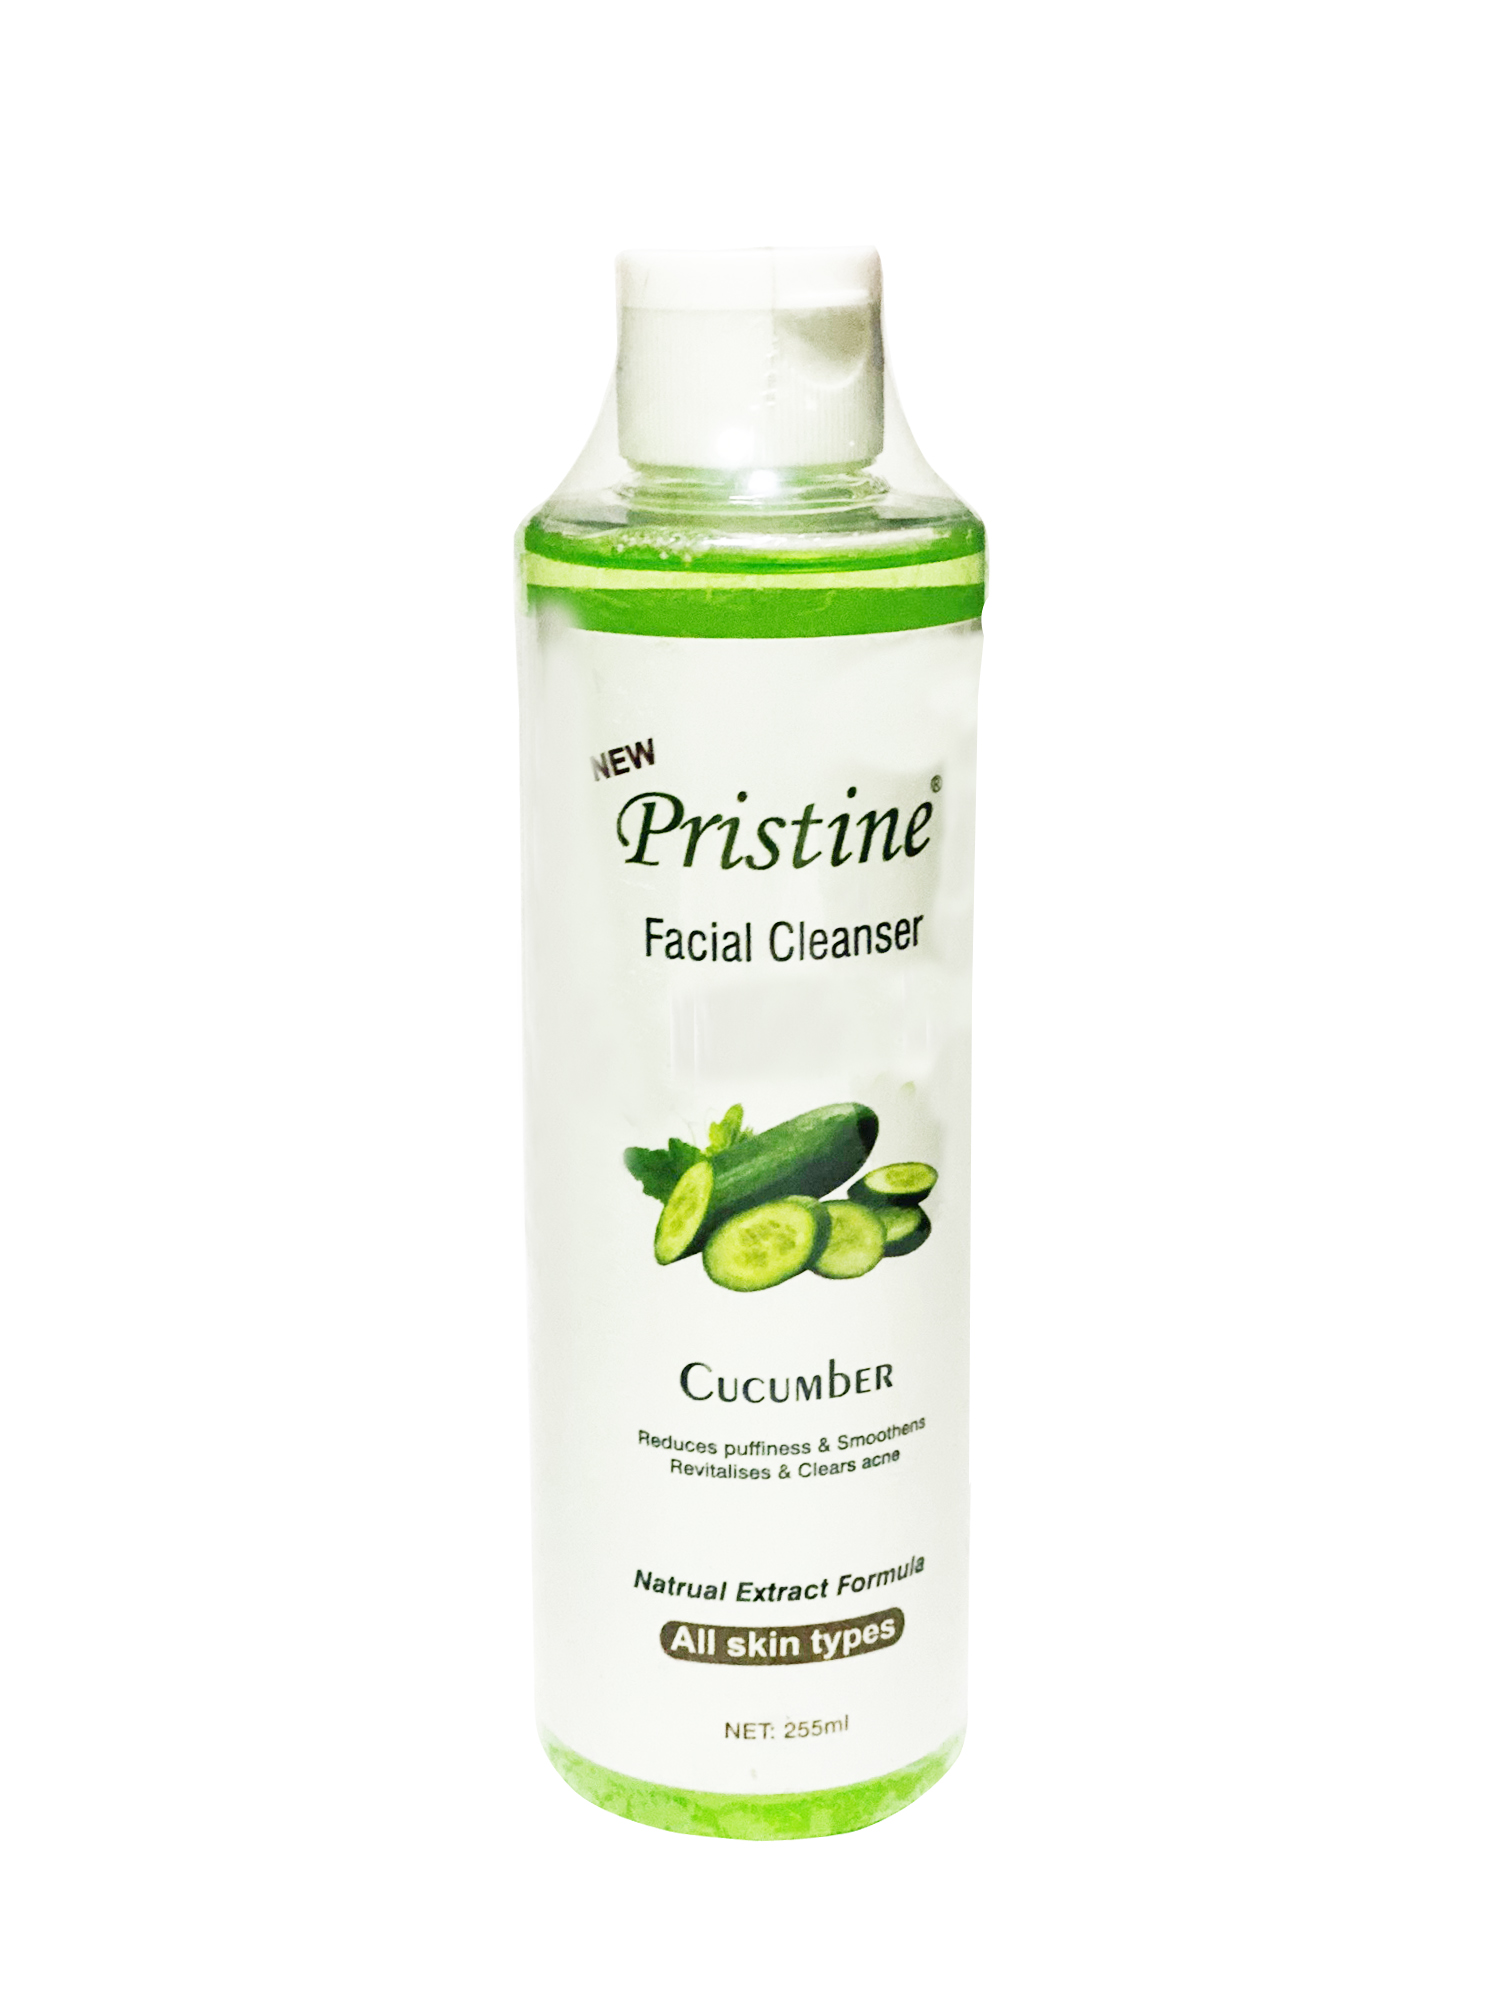 Pristine Facial Cleanser, Cucumber Reduces puffiness & smoothens,  Revitalizes & Clears Acne – Extra Nature Organic Shop